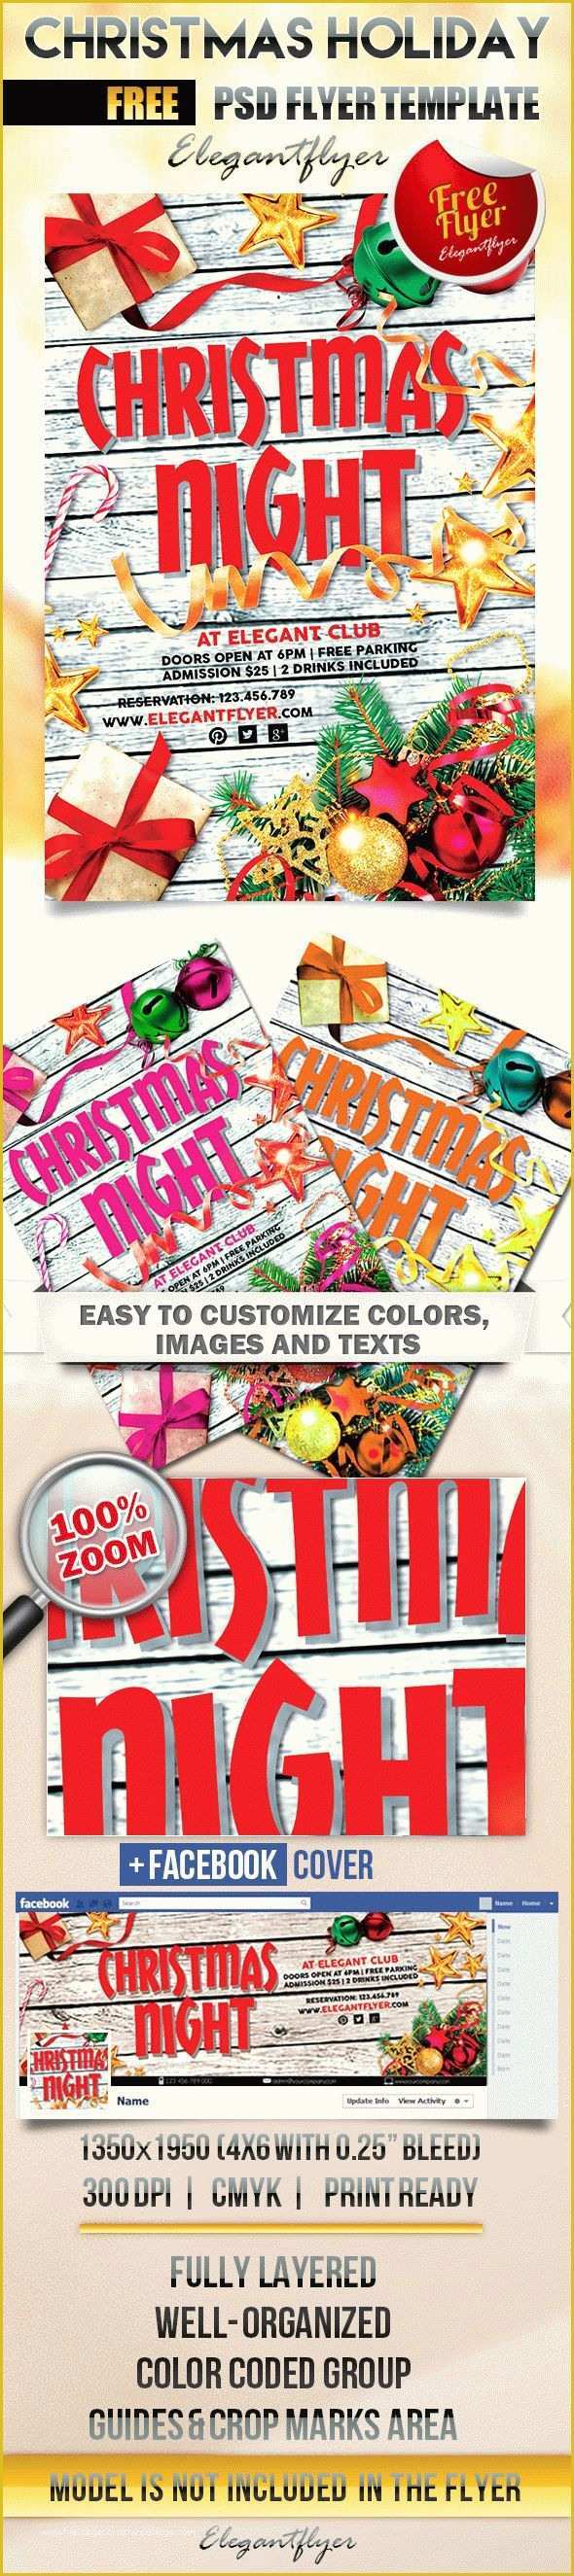 Free Christmas Brochure Templates Of Christmas Holiday – Free Flyer Psd Template – by Elegantflyer